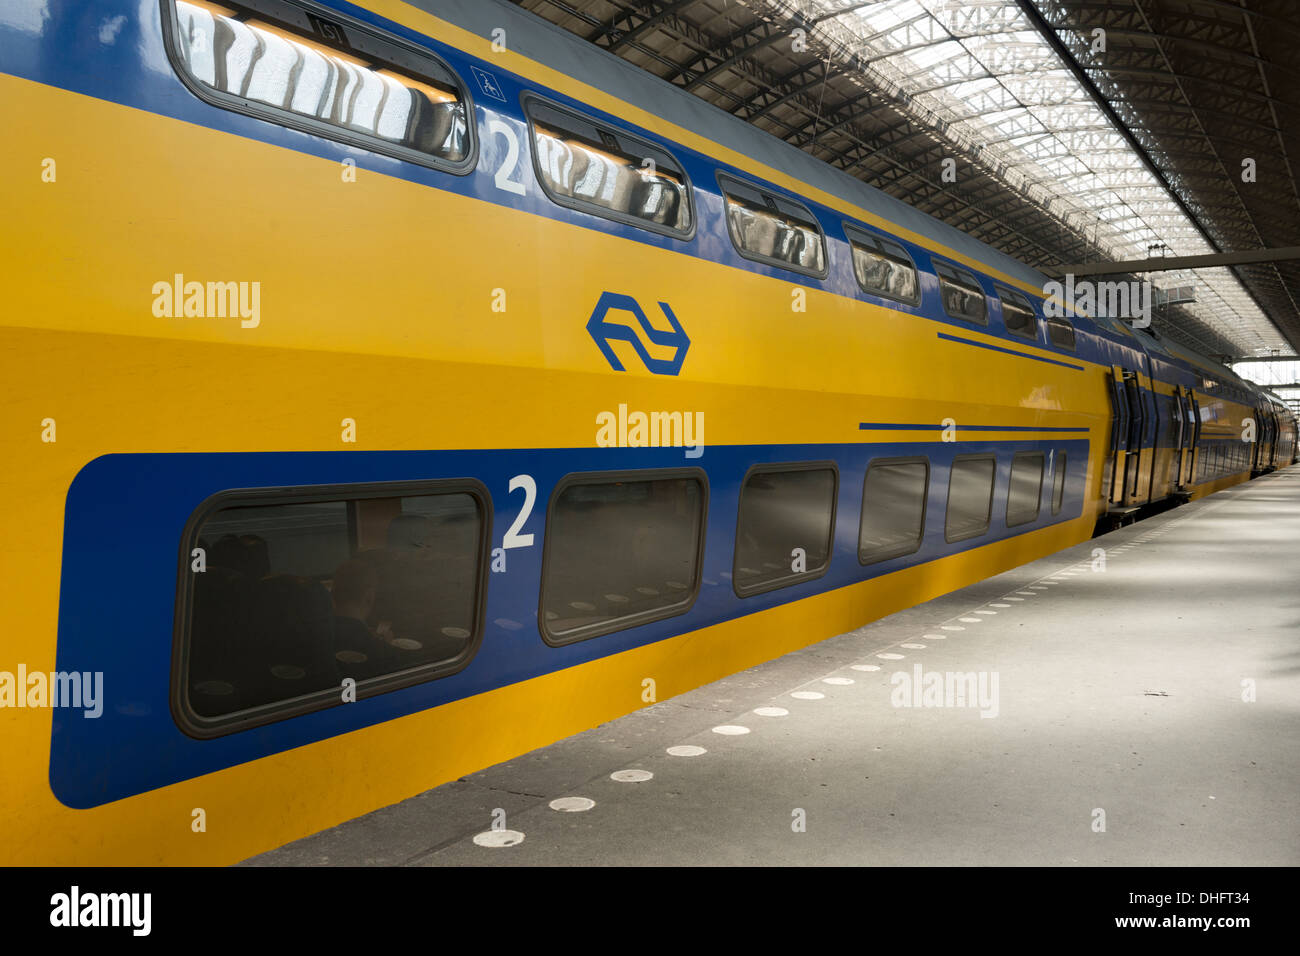 A double-decker train operated by Nederlandse Spoorwegen waiting at Centraal Station, Amsterdam, The Netherlands. Stock Photo